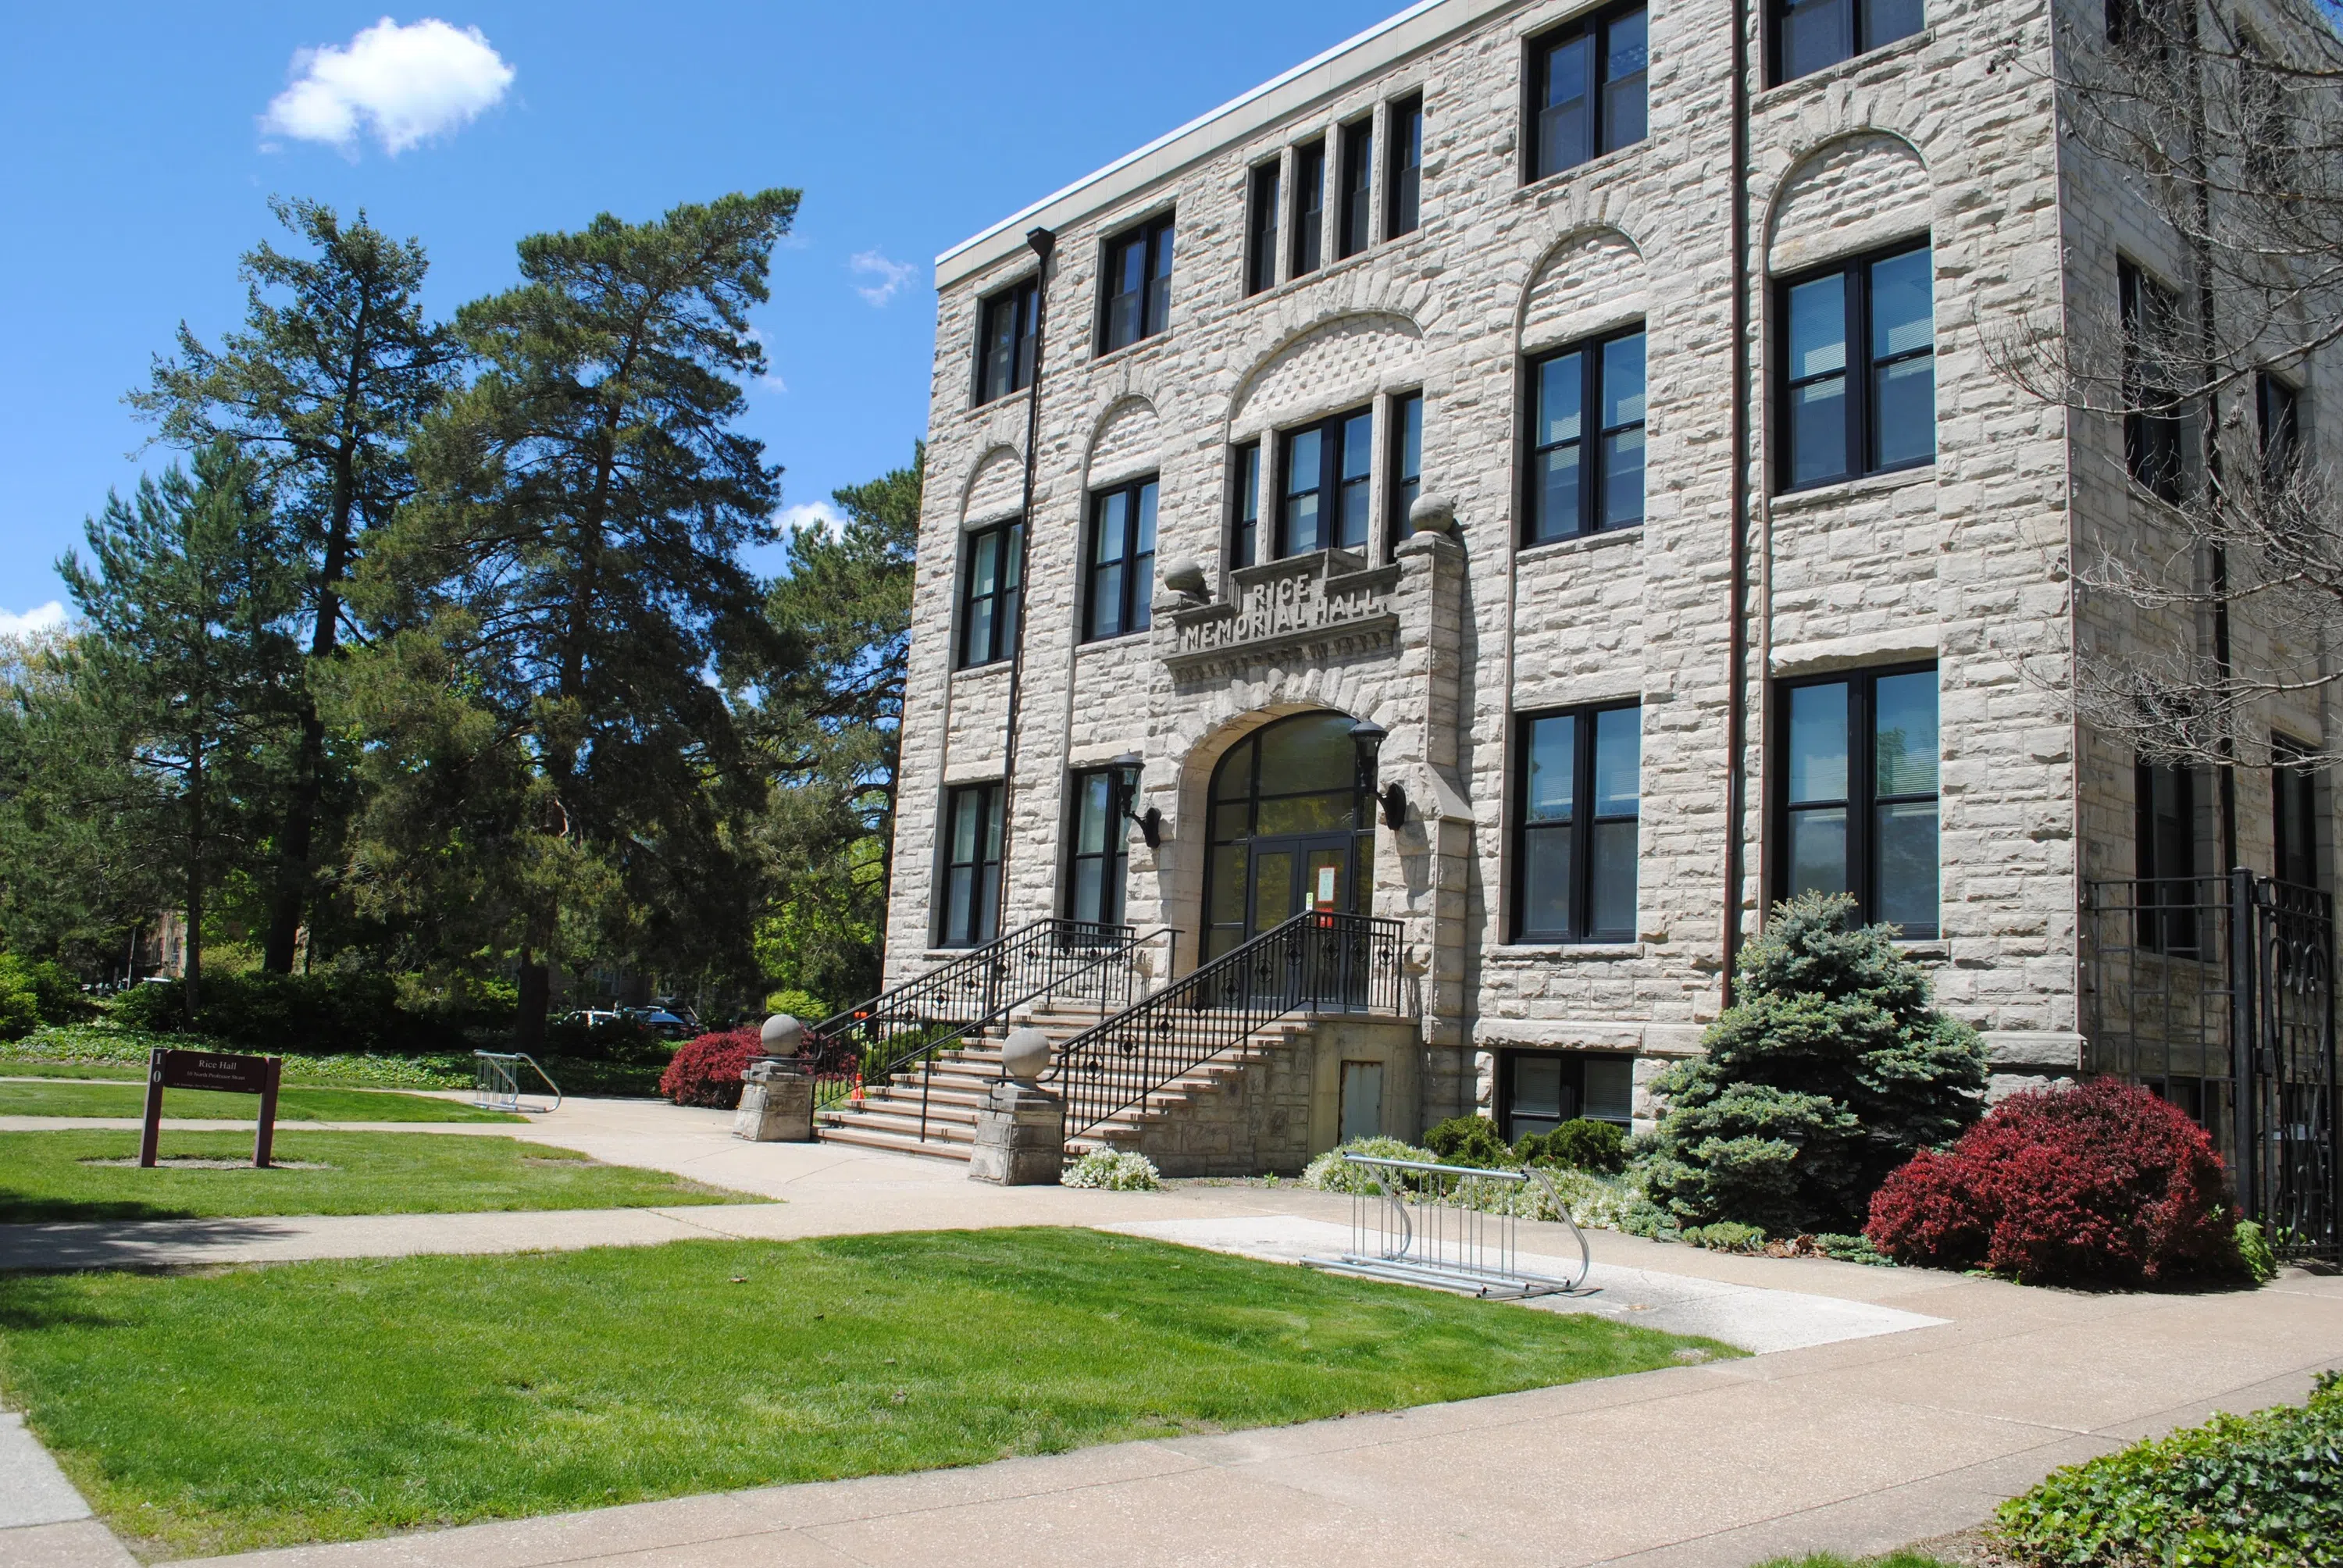 Outside view of Rice Hall in the summer